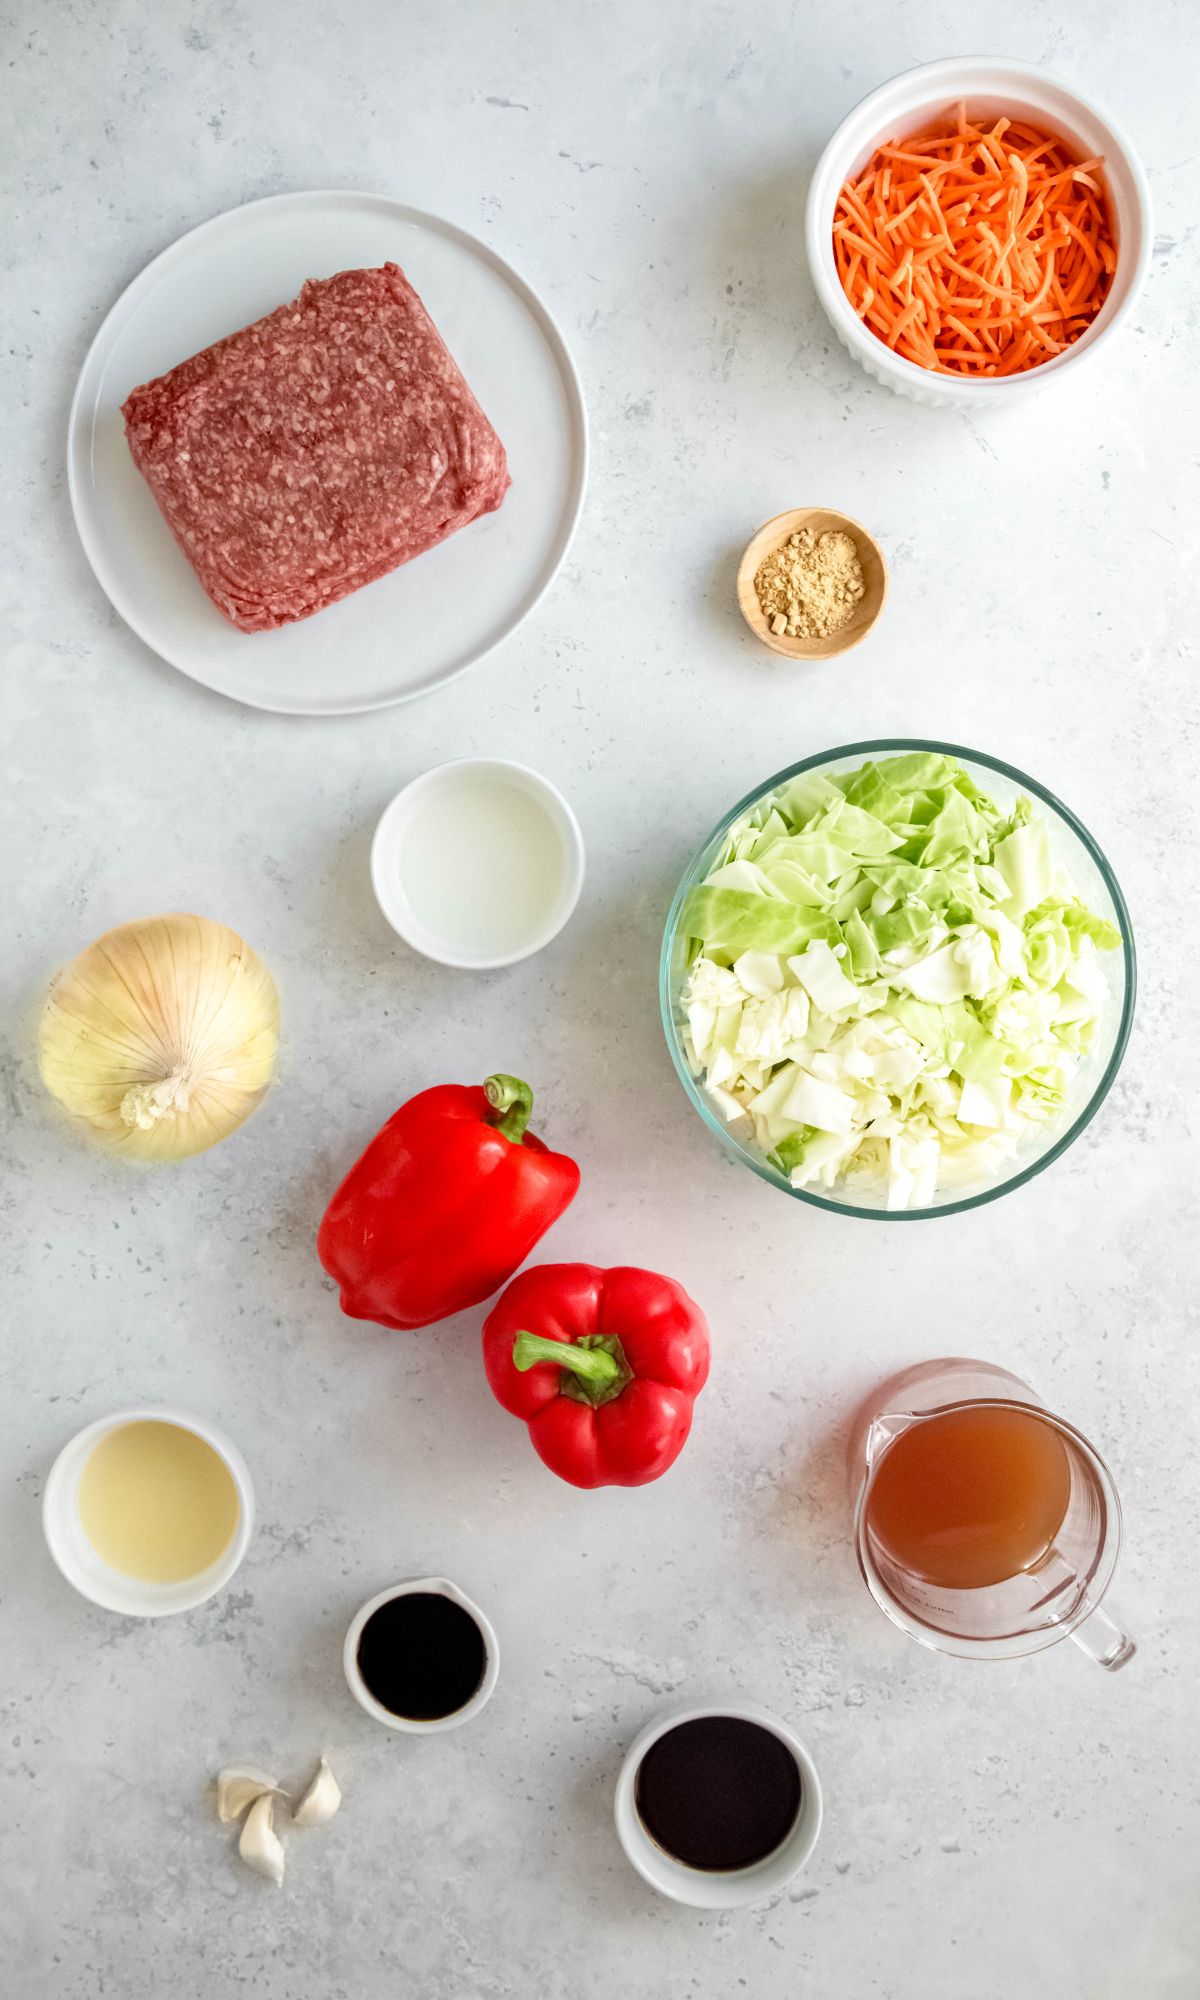 All of the ingredients for cabbage and ground beef stir-fry on a gray background.